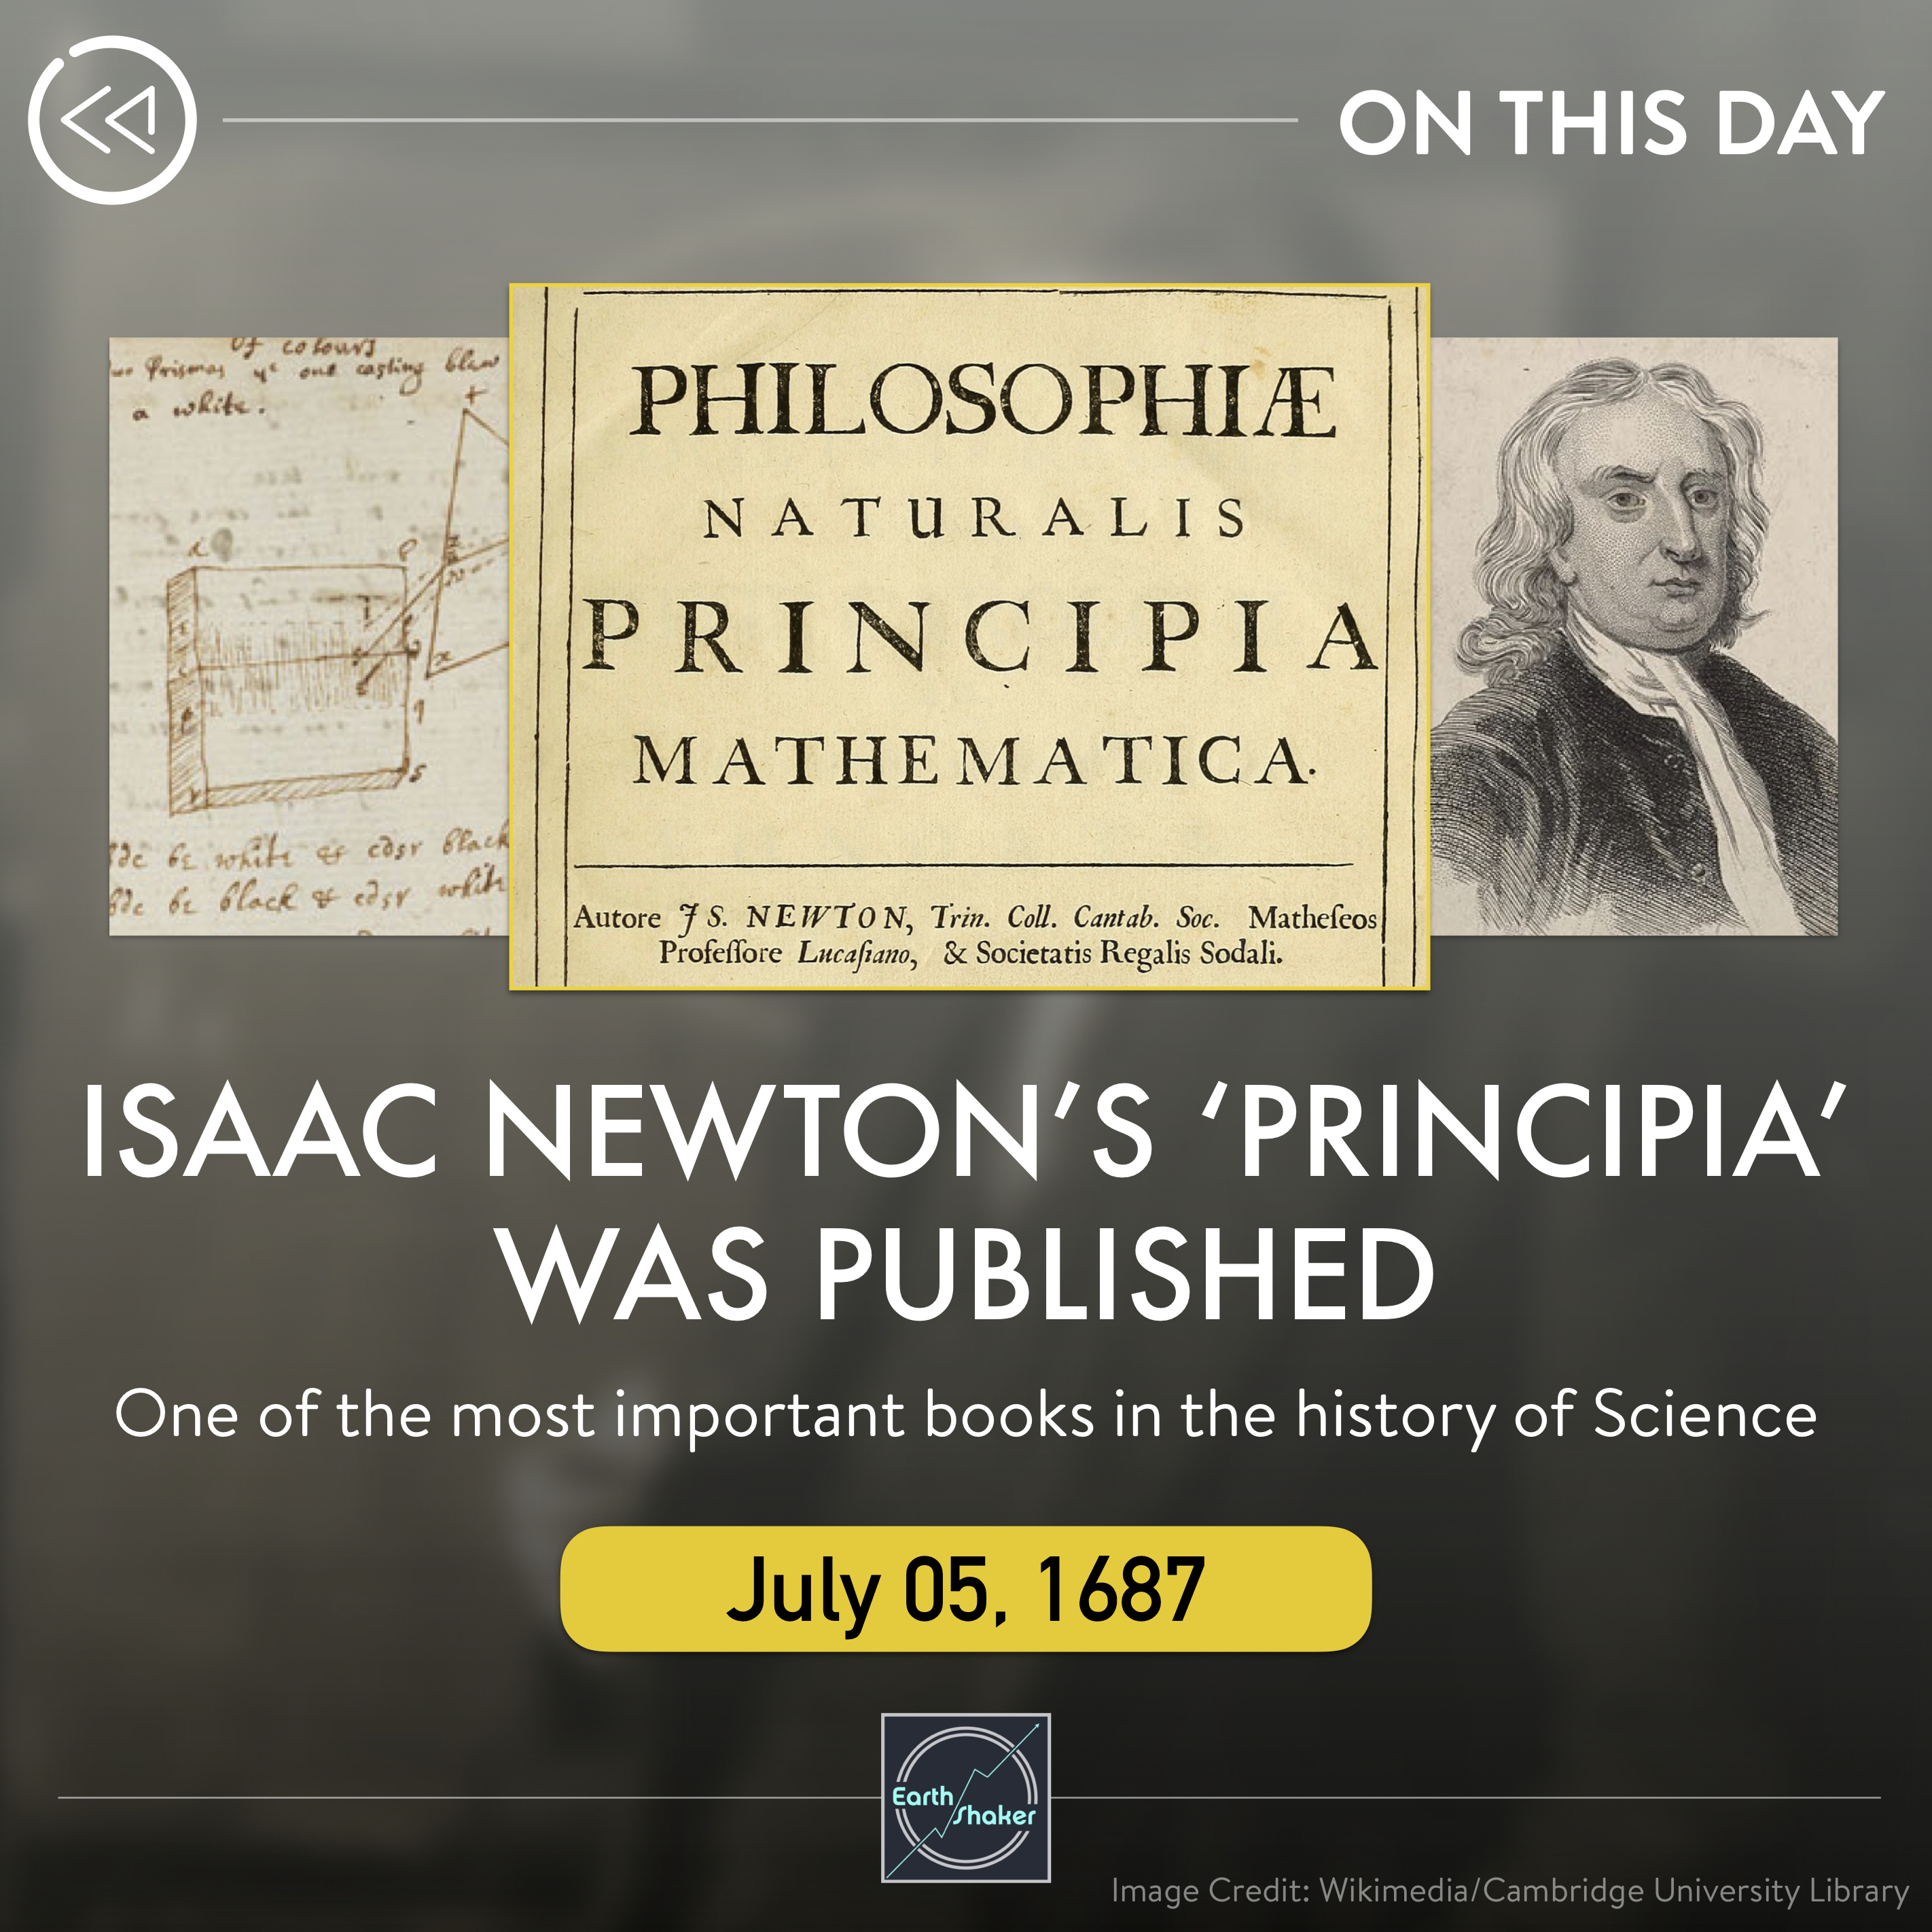 Earth Shaker PH on Twitter: "#AstroOTD ISAAC NEWTON'S 'PRINCIPIA' WAS PUBLISHED On this day in 1687, the 'Philosophiæ Naturalis Principia Mathematica', often simplified to 'Principia', was published by Isaac Newton - detailing